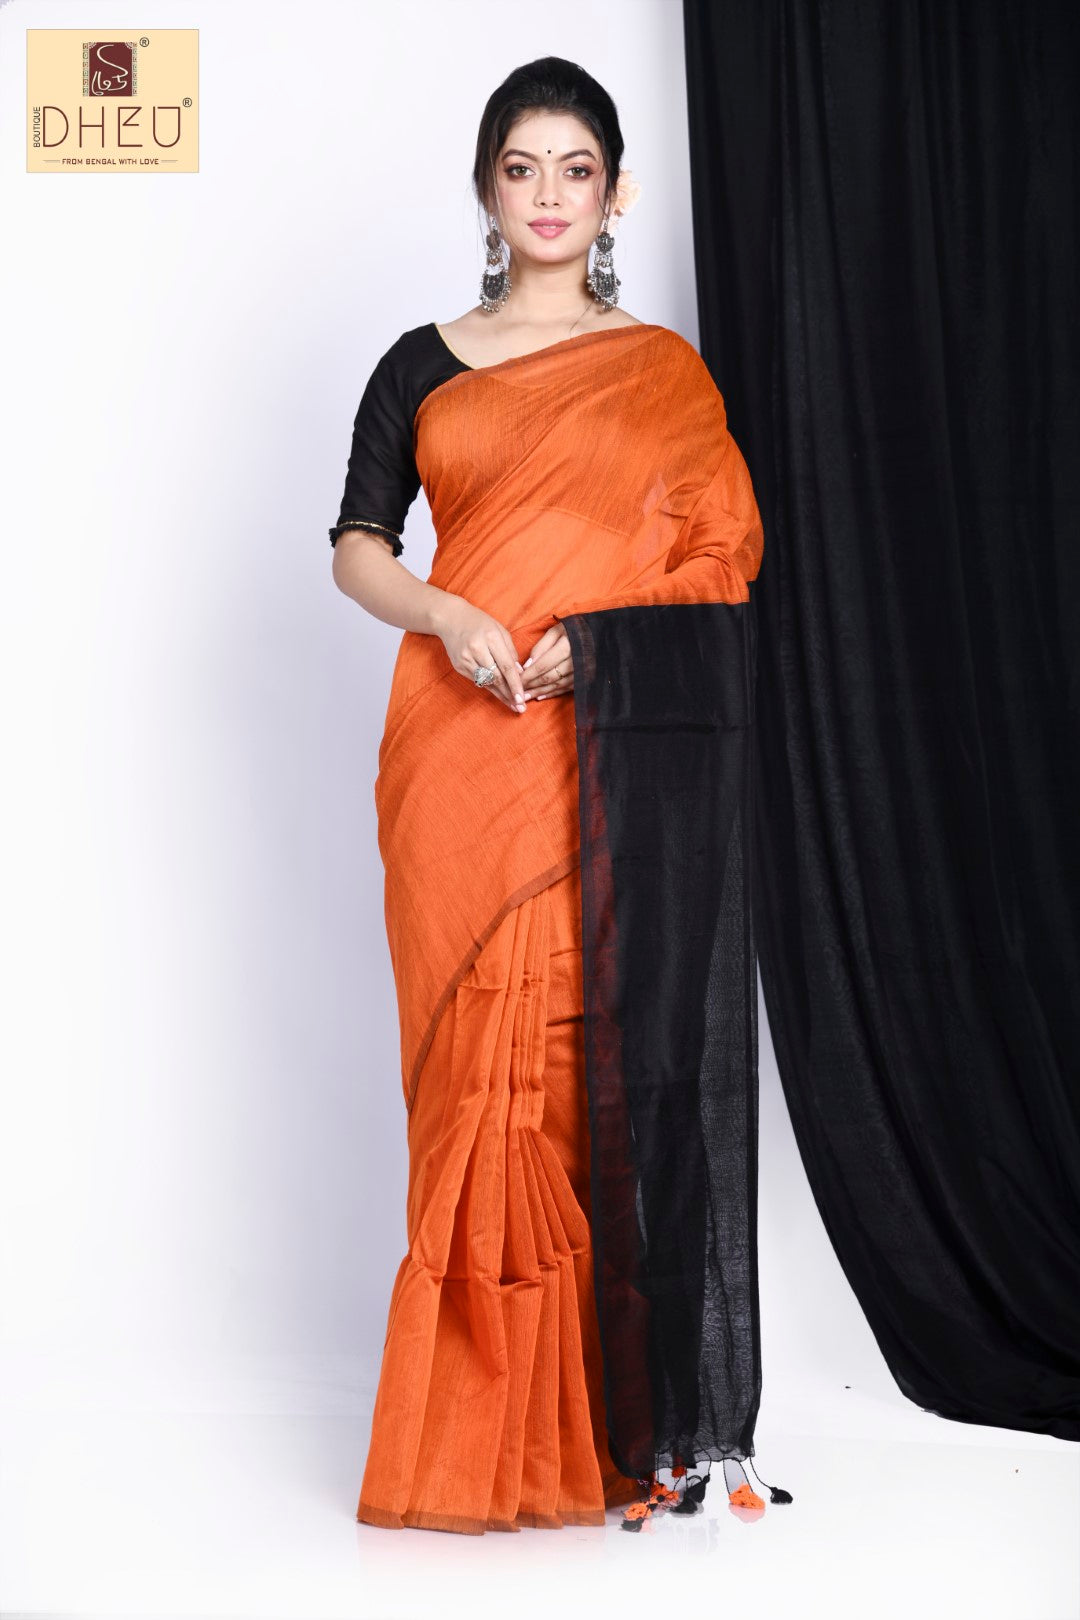 Designer handloom cotton saree at lowest cost only at dheu.in